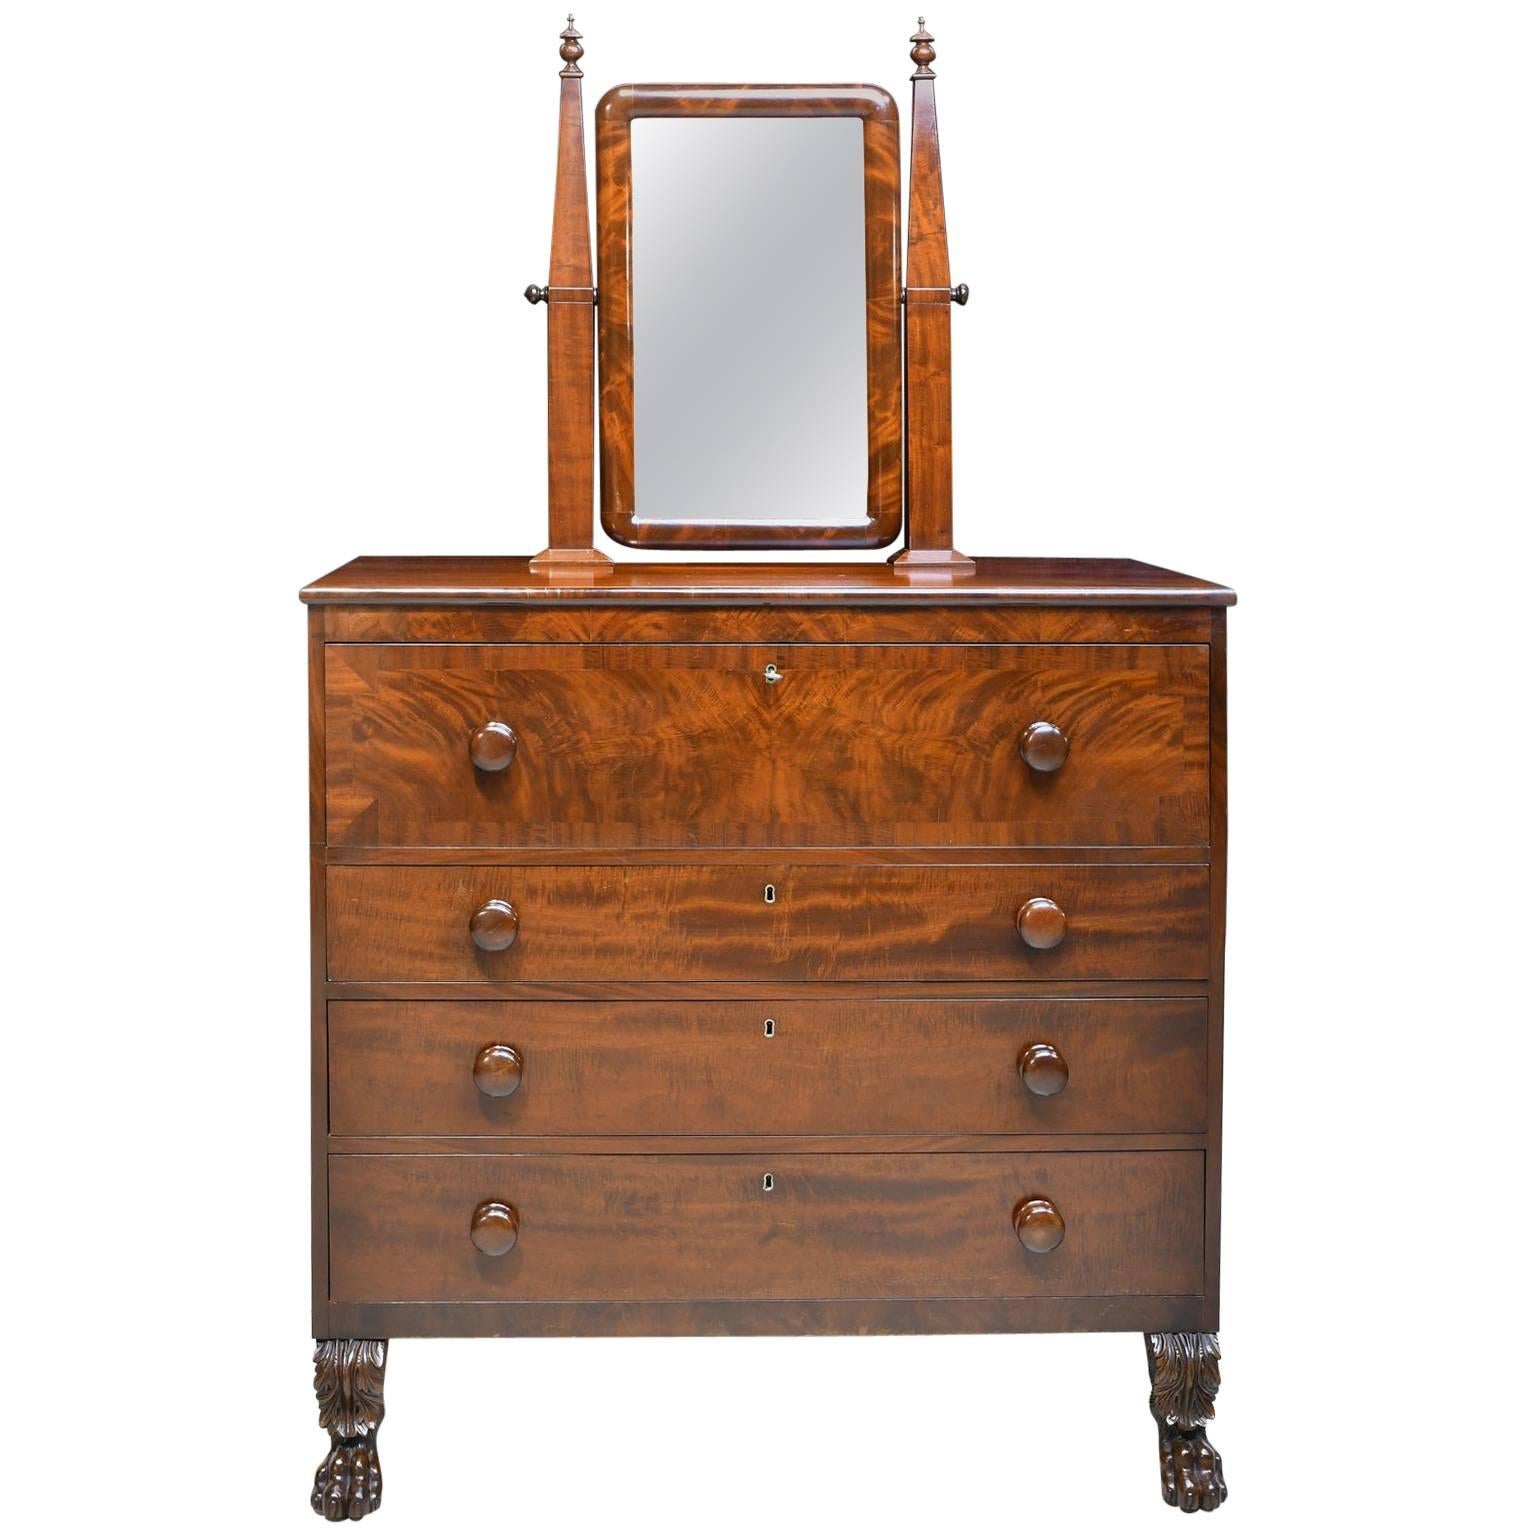 An American Empire chest in mahogany with four drawers with original turned knobs, and with original vanity mirror with square tapering columns. Chest rests on lion's paw feet with acanthus carvings on the front, and original turned back feet.